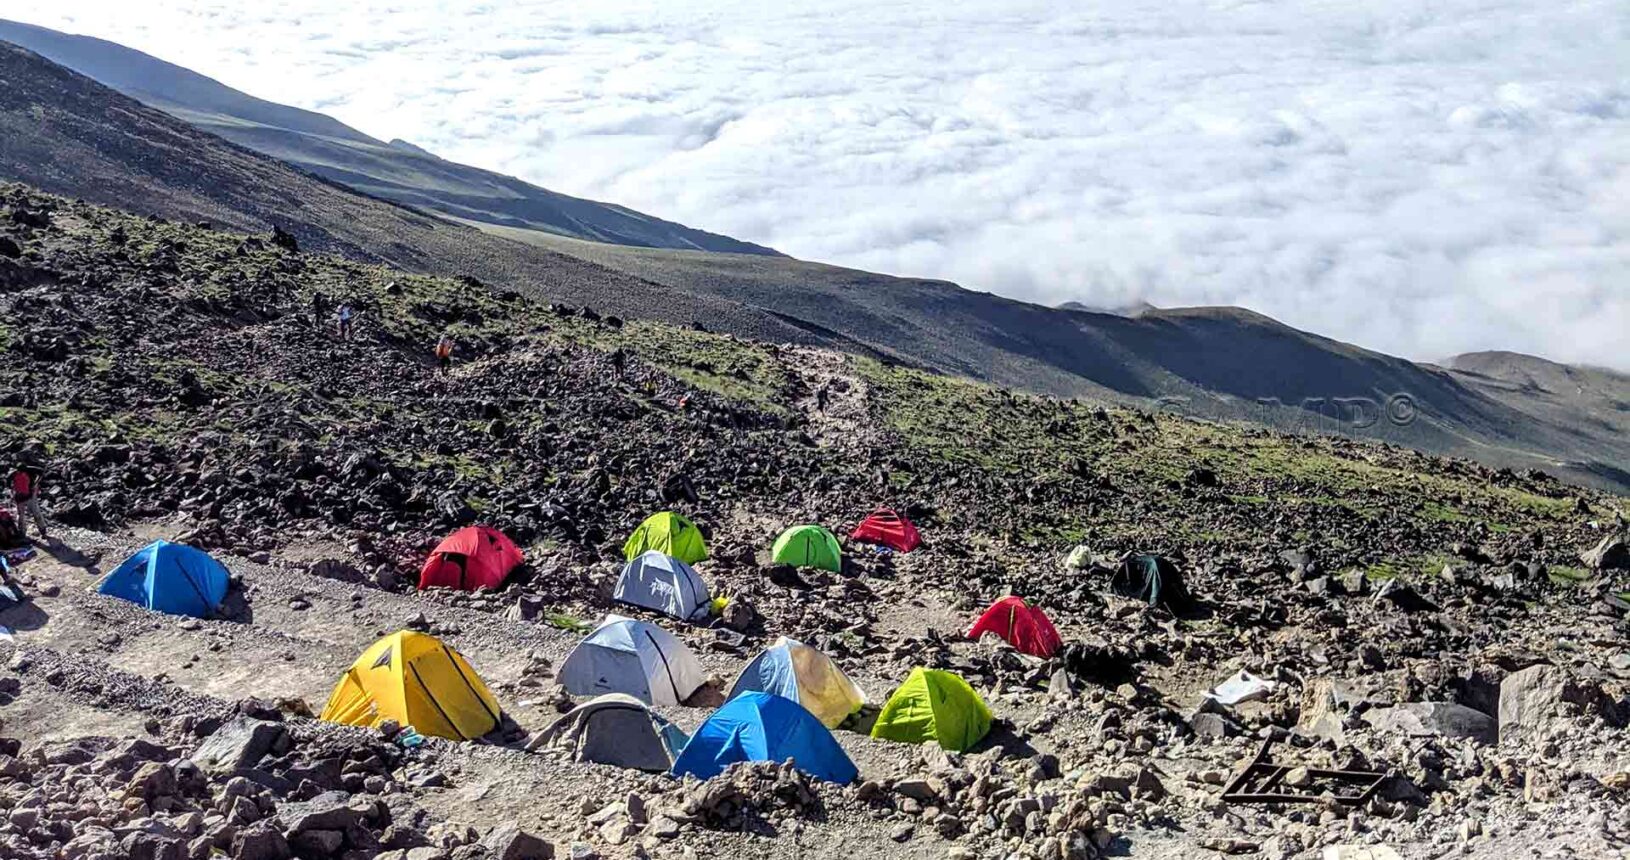 A few steps higher: Overlooking the designated area for tents at Camp 3 of Mount Damavand.